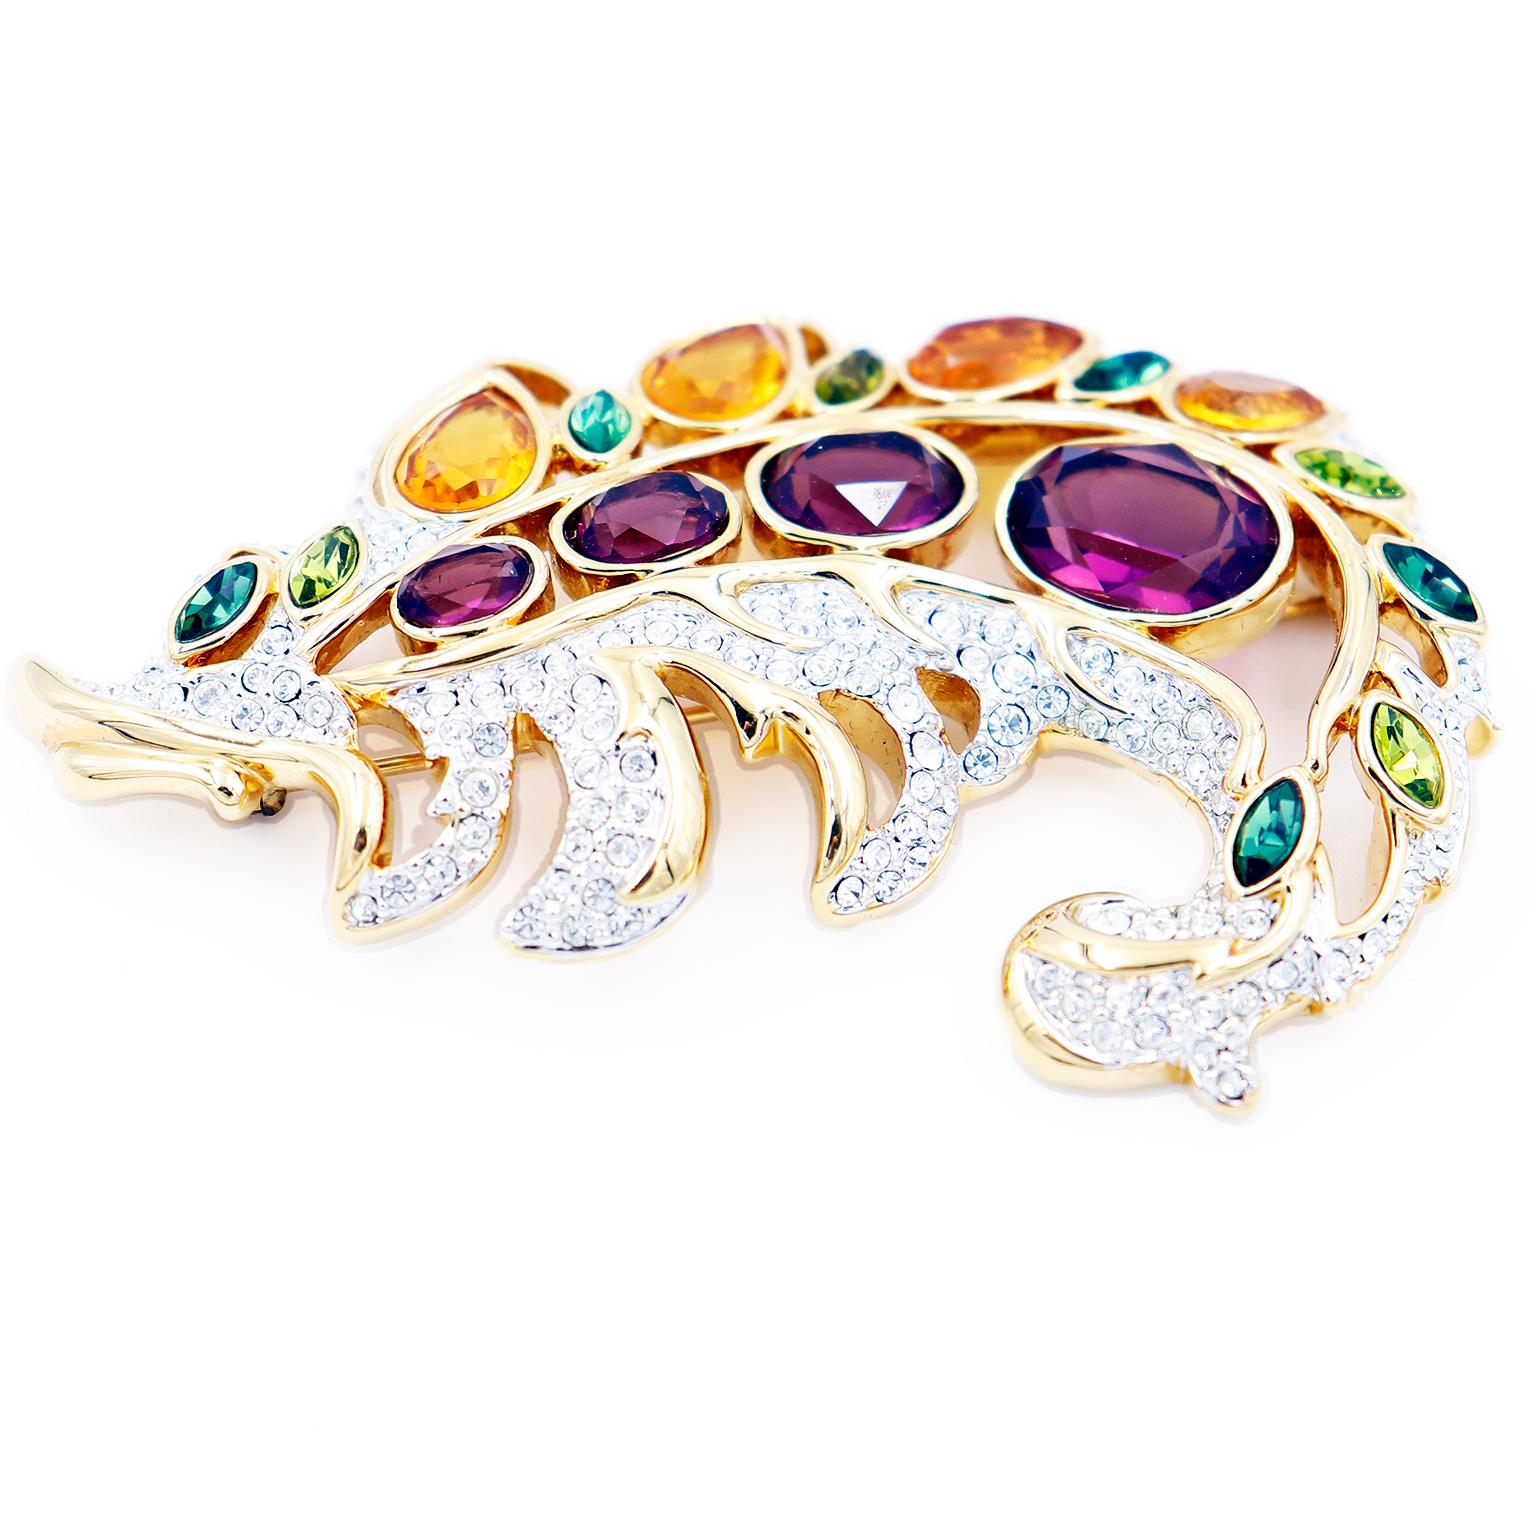 Women's Swarovski Crystal Vintage Signed Gold Brooch With Multi Colored Stones For Sale